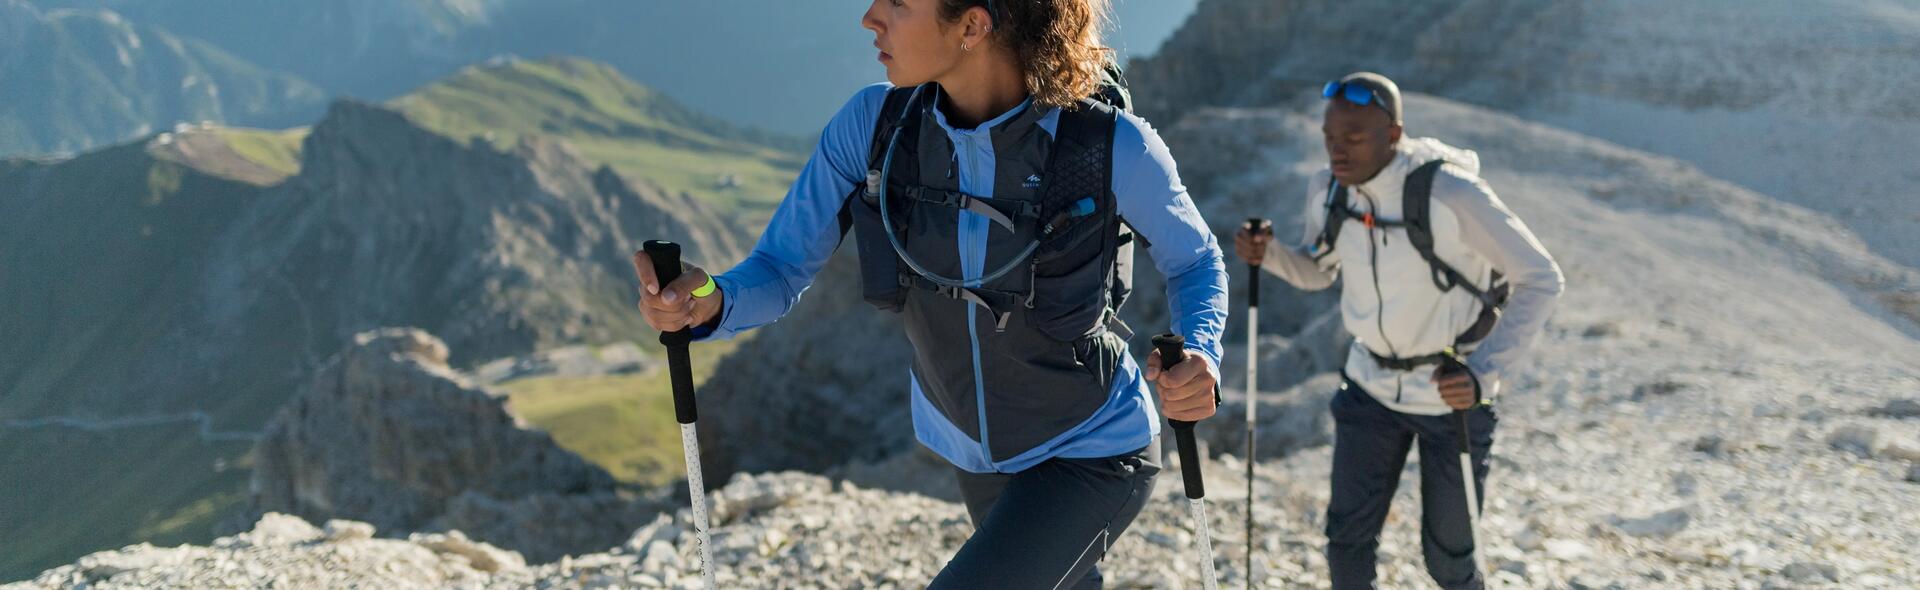 5 reasons to take up speed hiking this summer - title